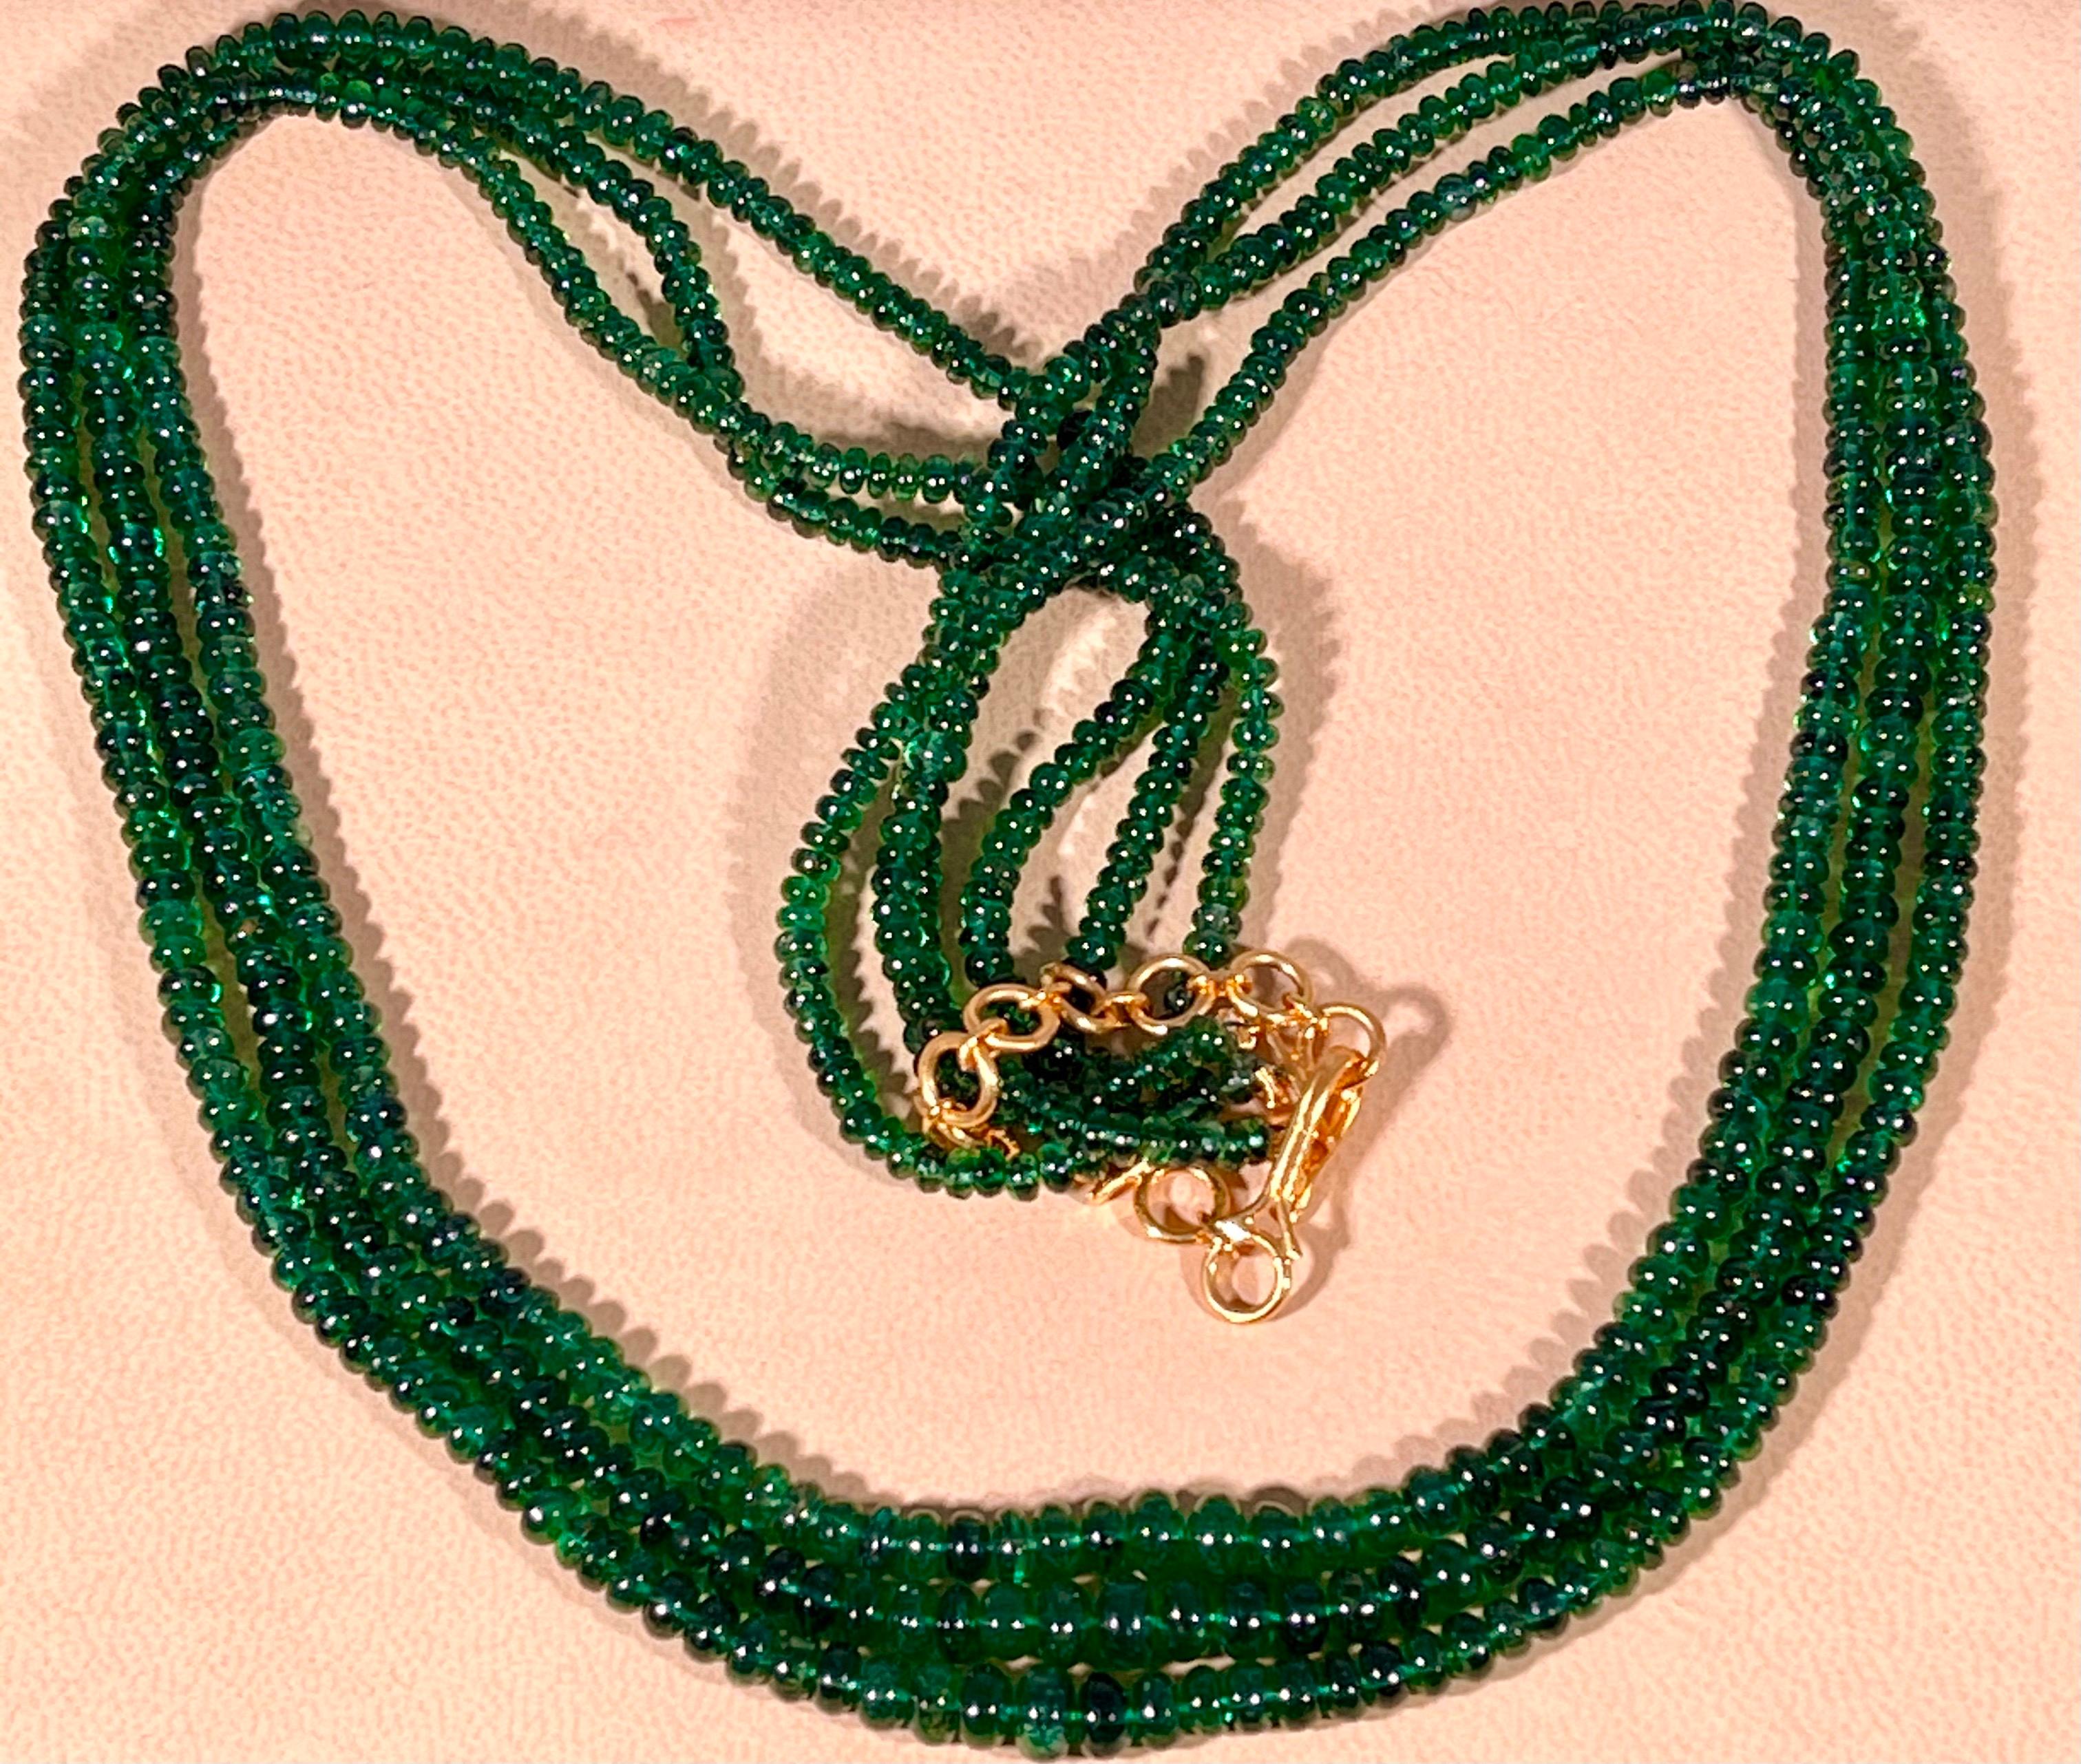 200Ct Fine Emerald Beads 3 Line Necklace with 14 Kt Yellow Gold Clasp Adjustable For Sale 3